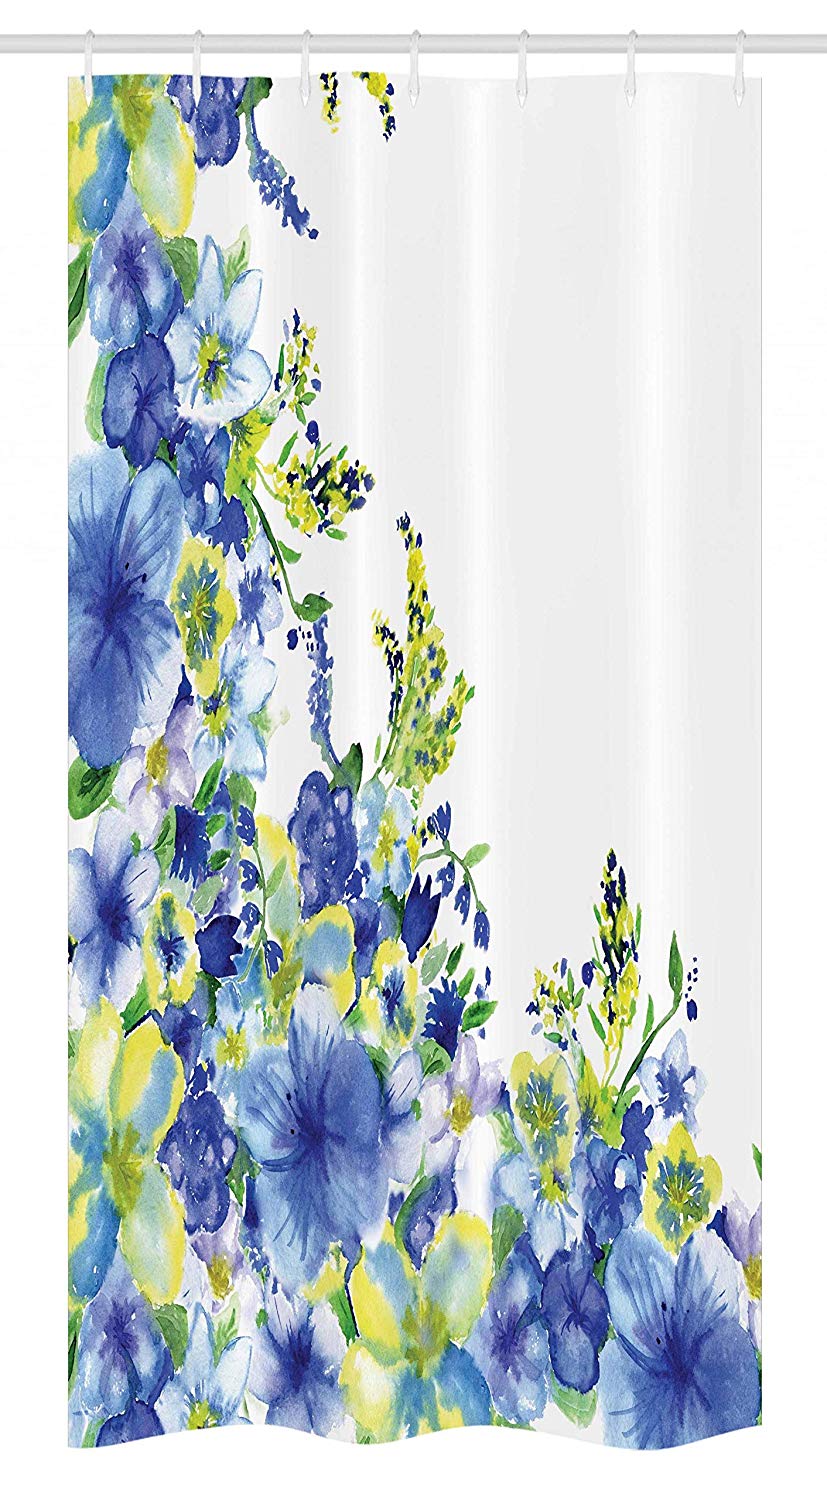 Ambesonne Watercolor Flower Stall Shower Curtain, Motley Floret Motifs with Splash Anemone Iris Revival of Nature Theme, Fabric Bathroom Decor Set with Hooks, 36